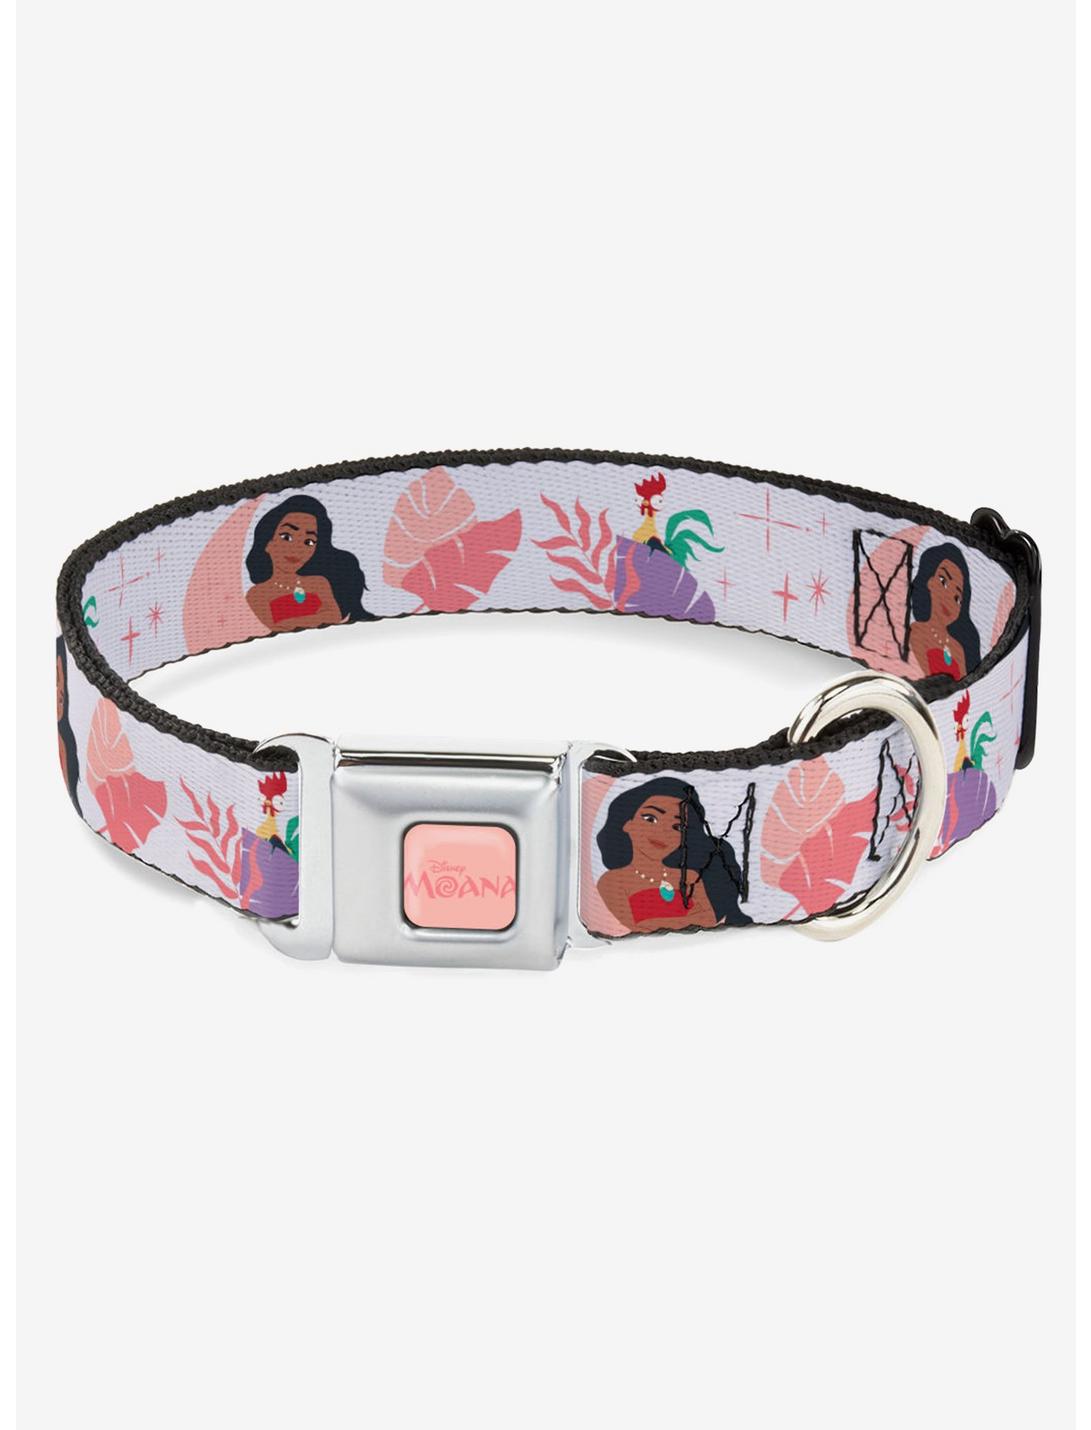 Disney Moana and Hei Hei Poses with Flowers Seatbelt Buckle Dog Collar, BRIGHT WHITE, hi-res